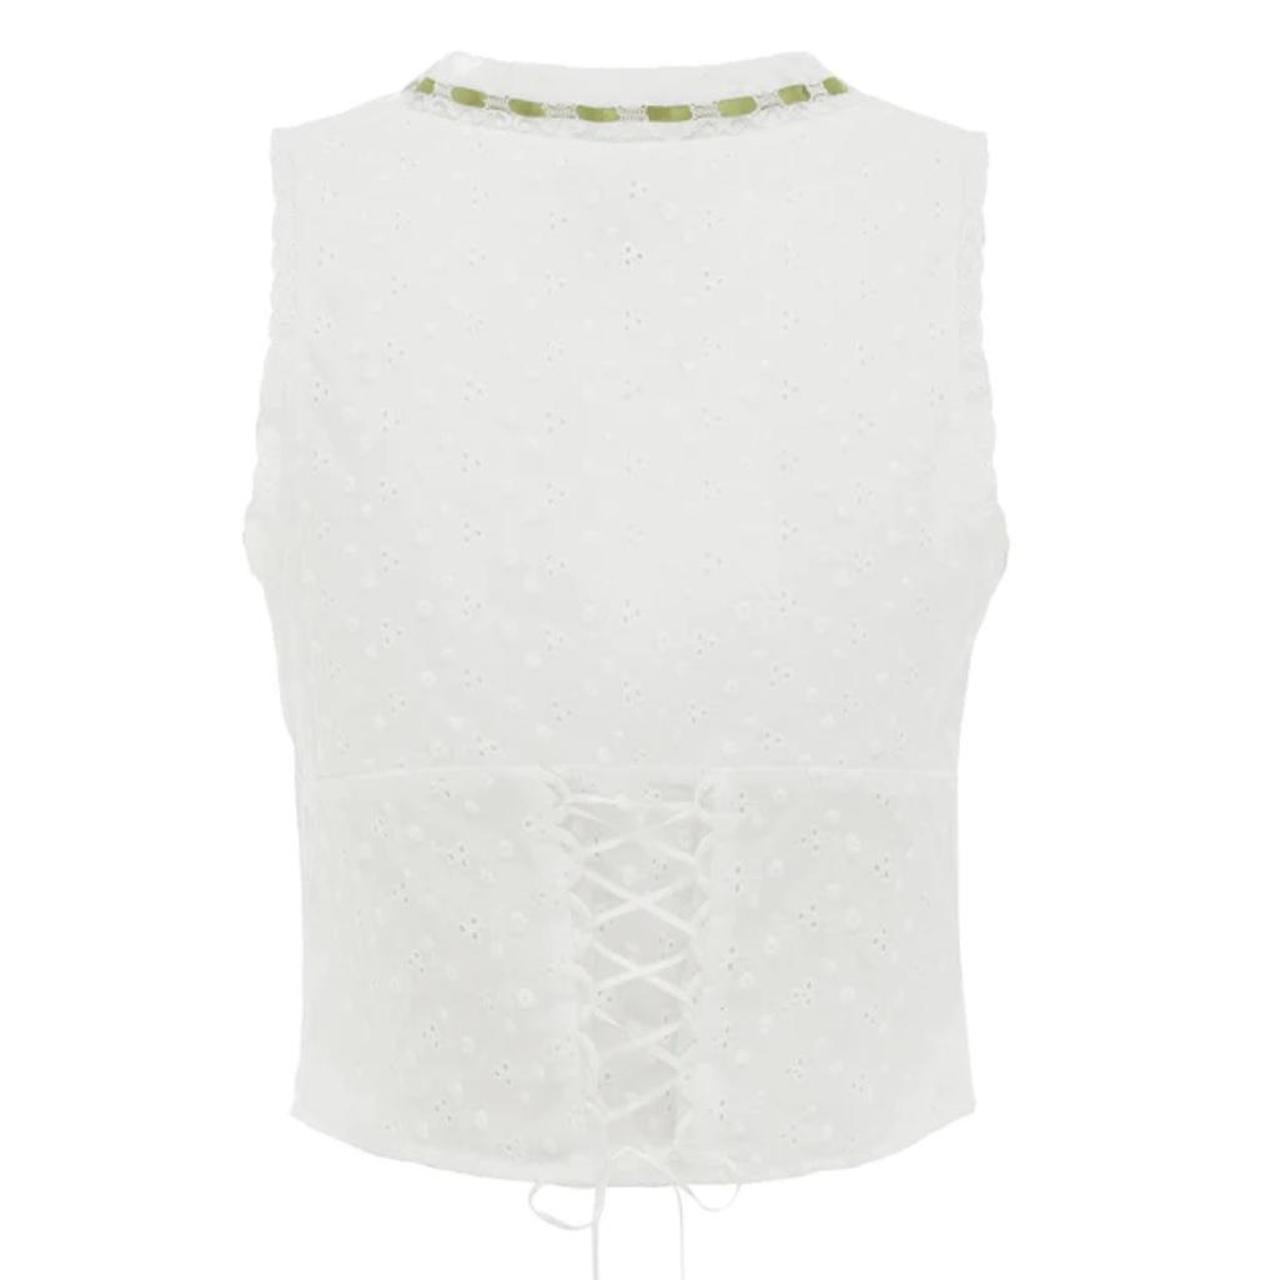 With Jéan Women's White and Green Blouse (3)